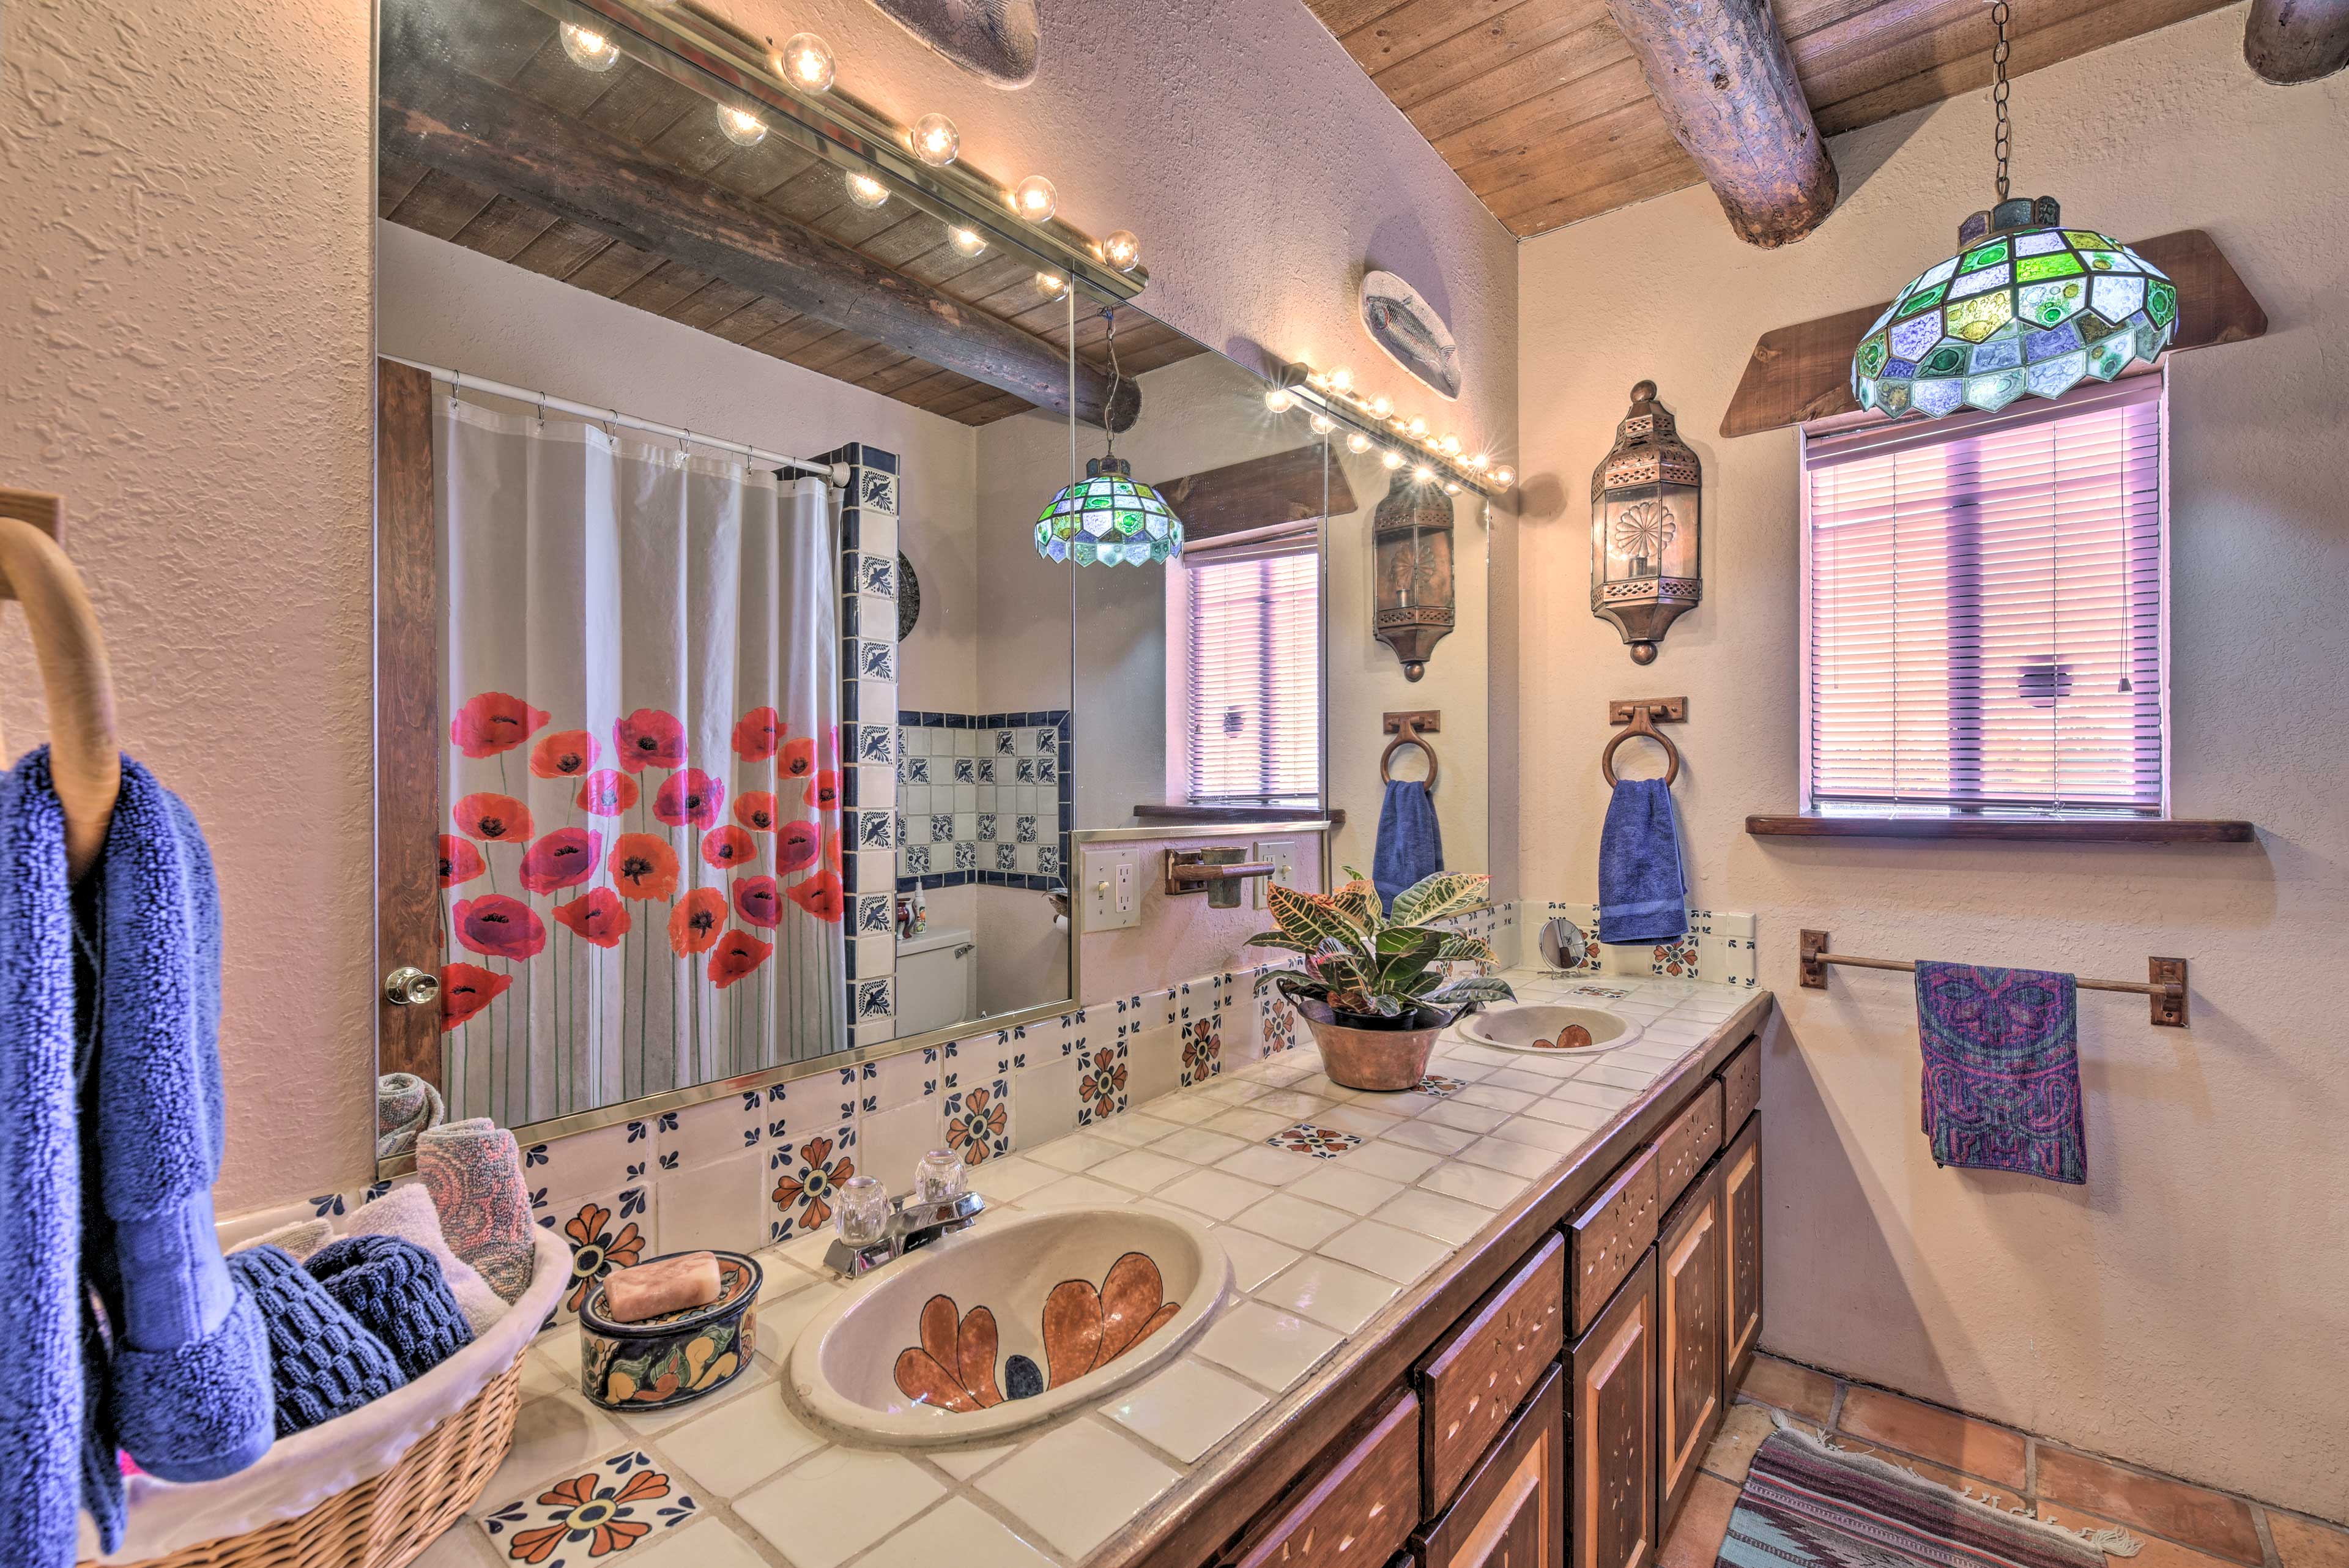 Rinse off the day in this spacious bathroom.